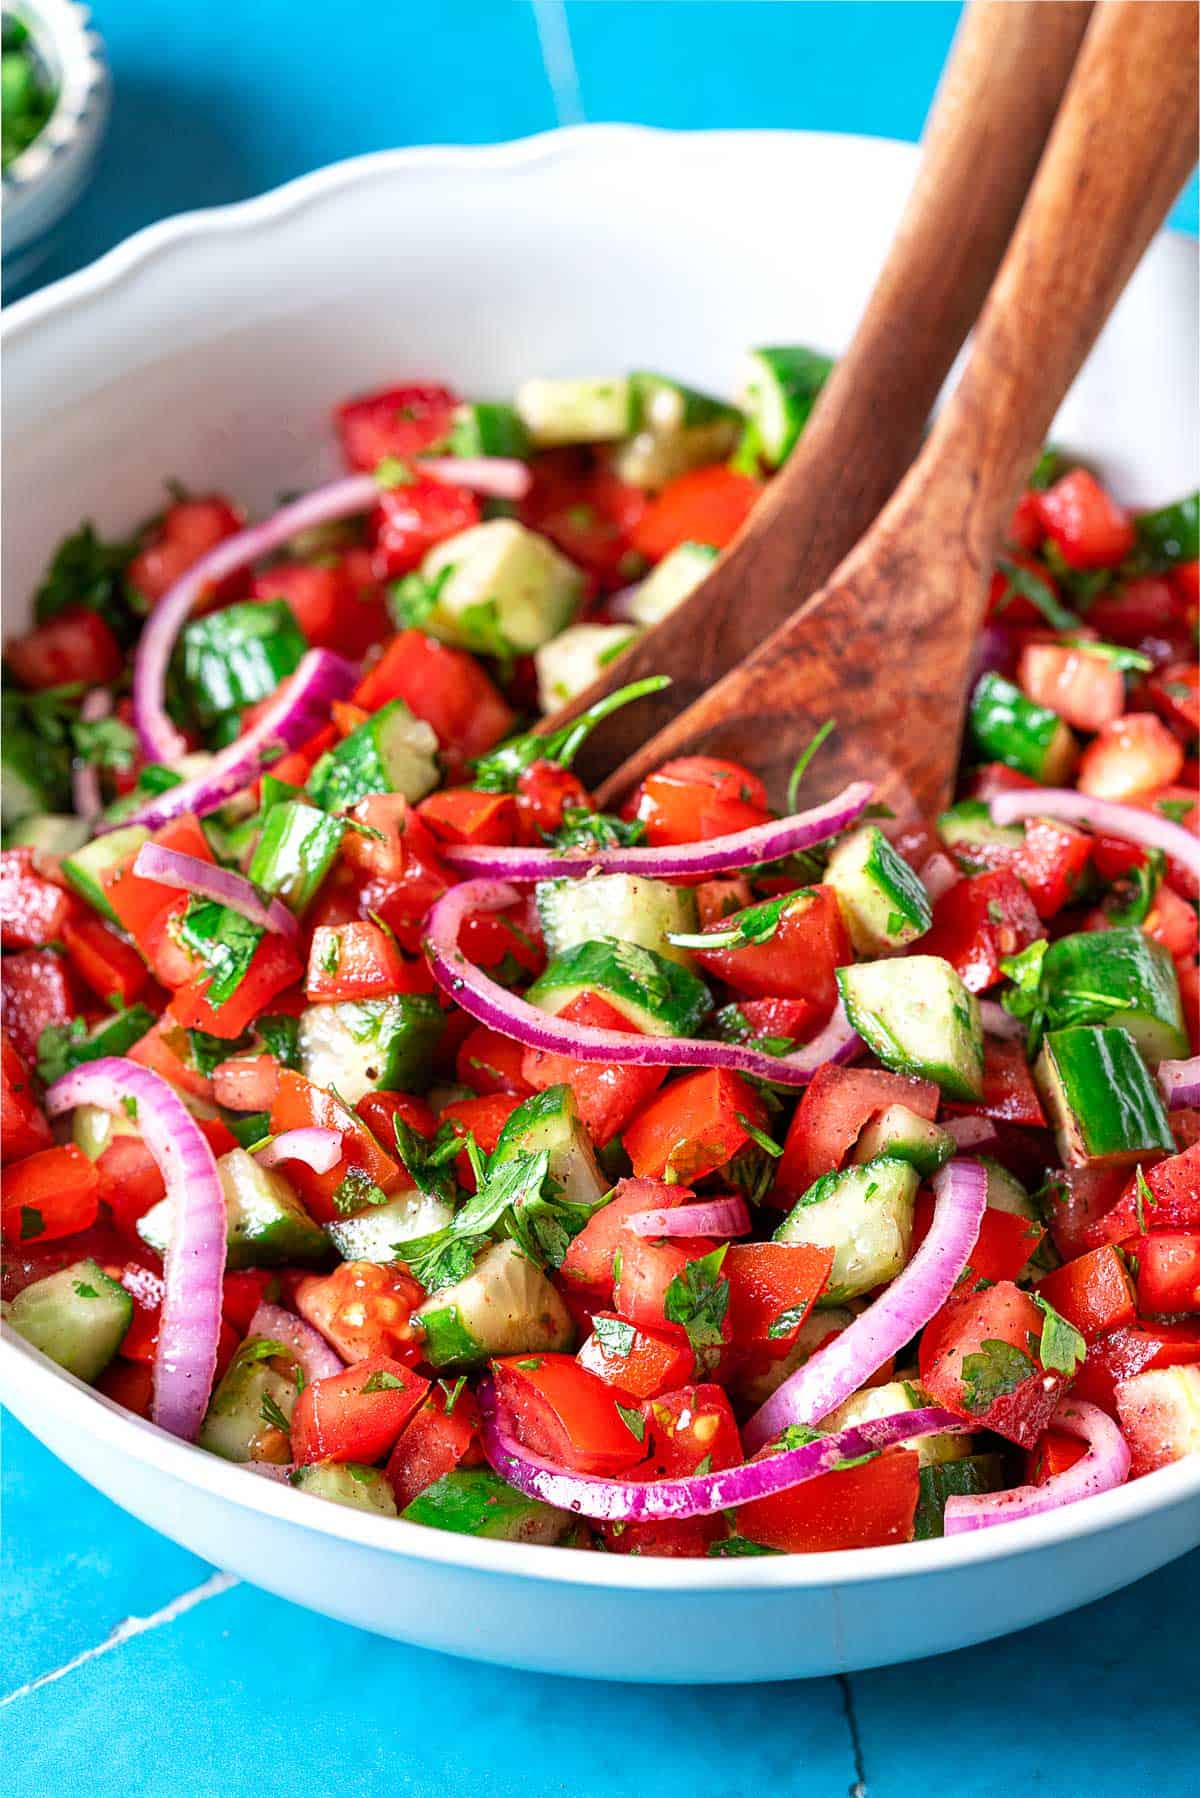 cucumber tomato salad in a bowl with wooden serving utensils.